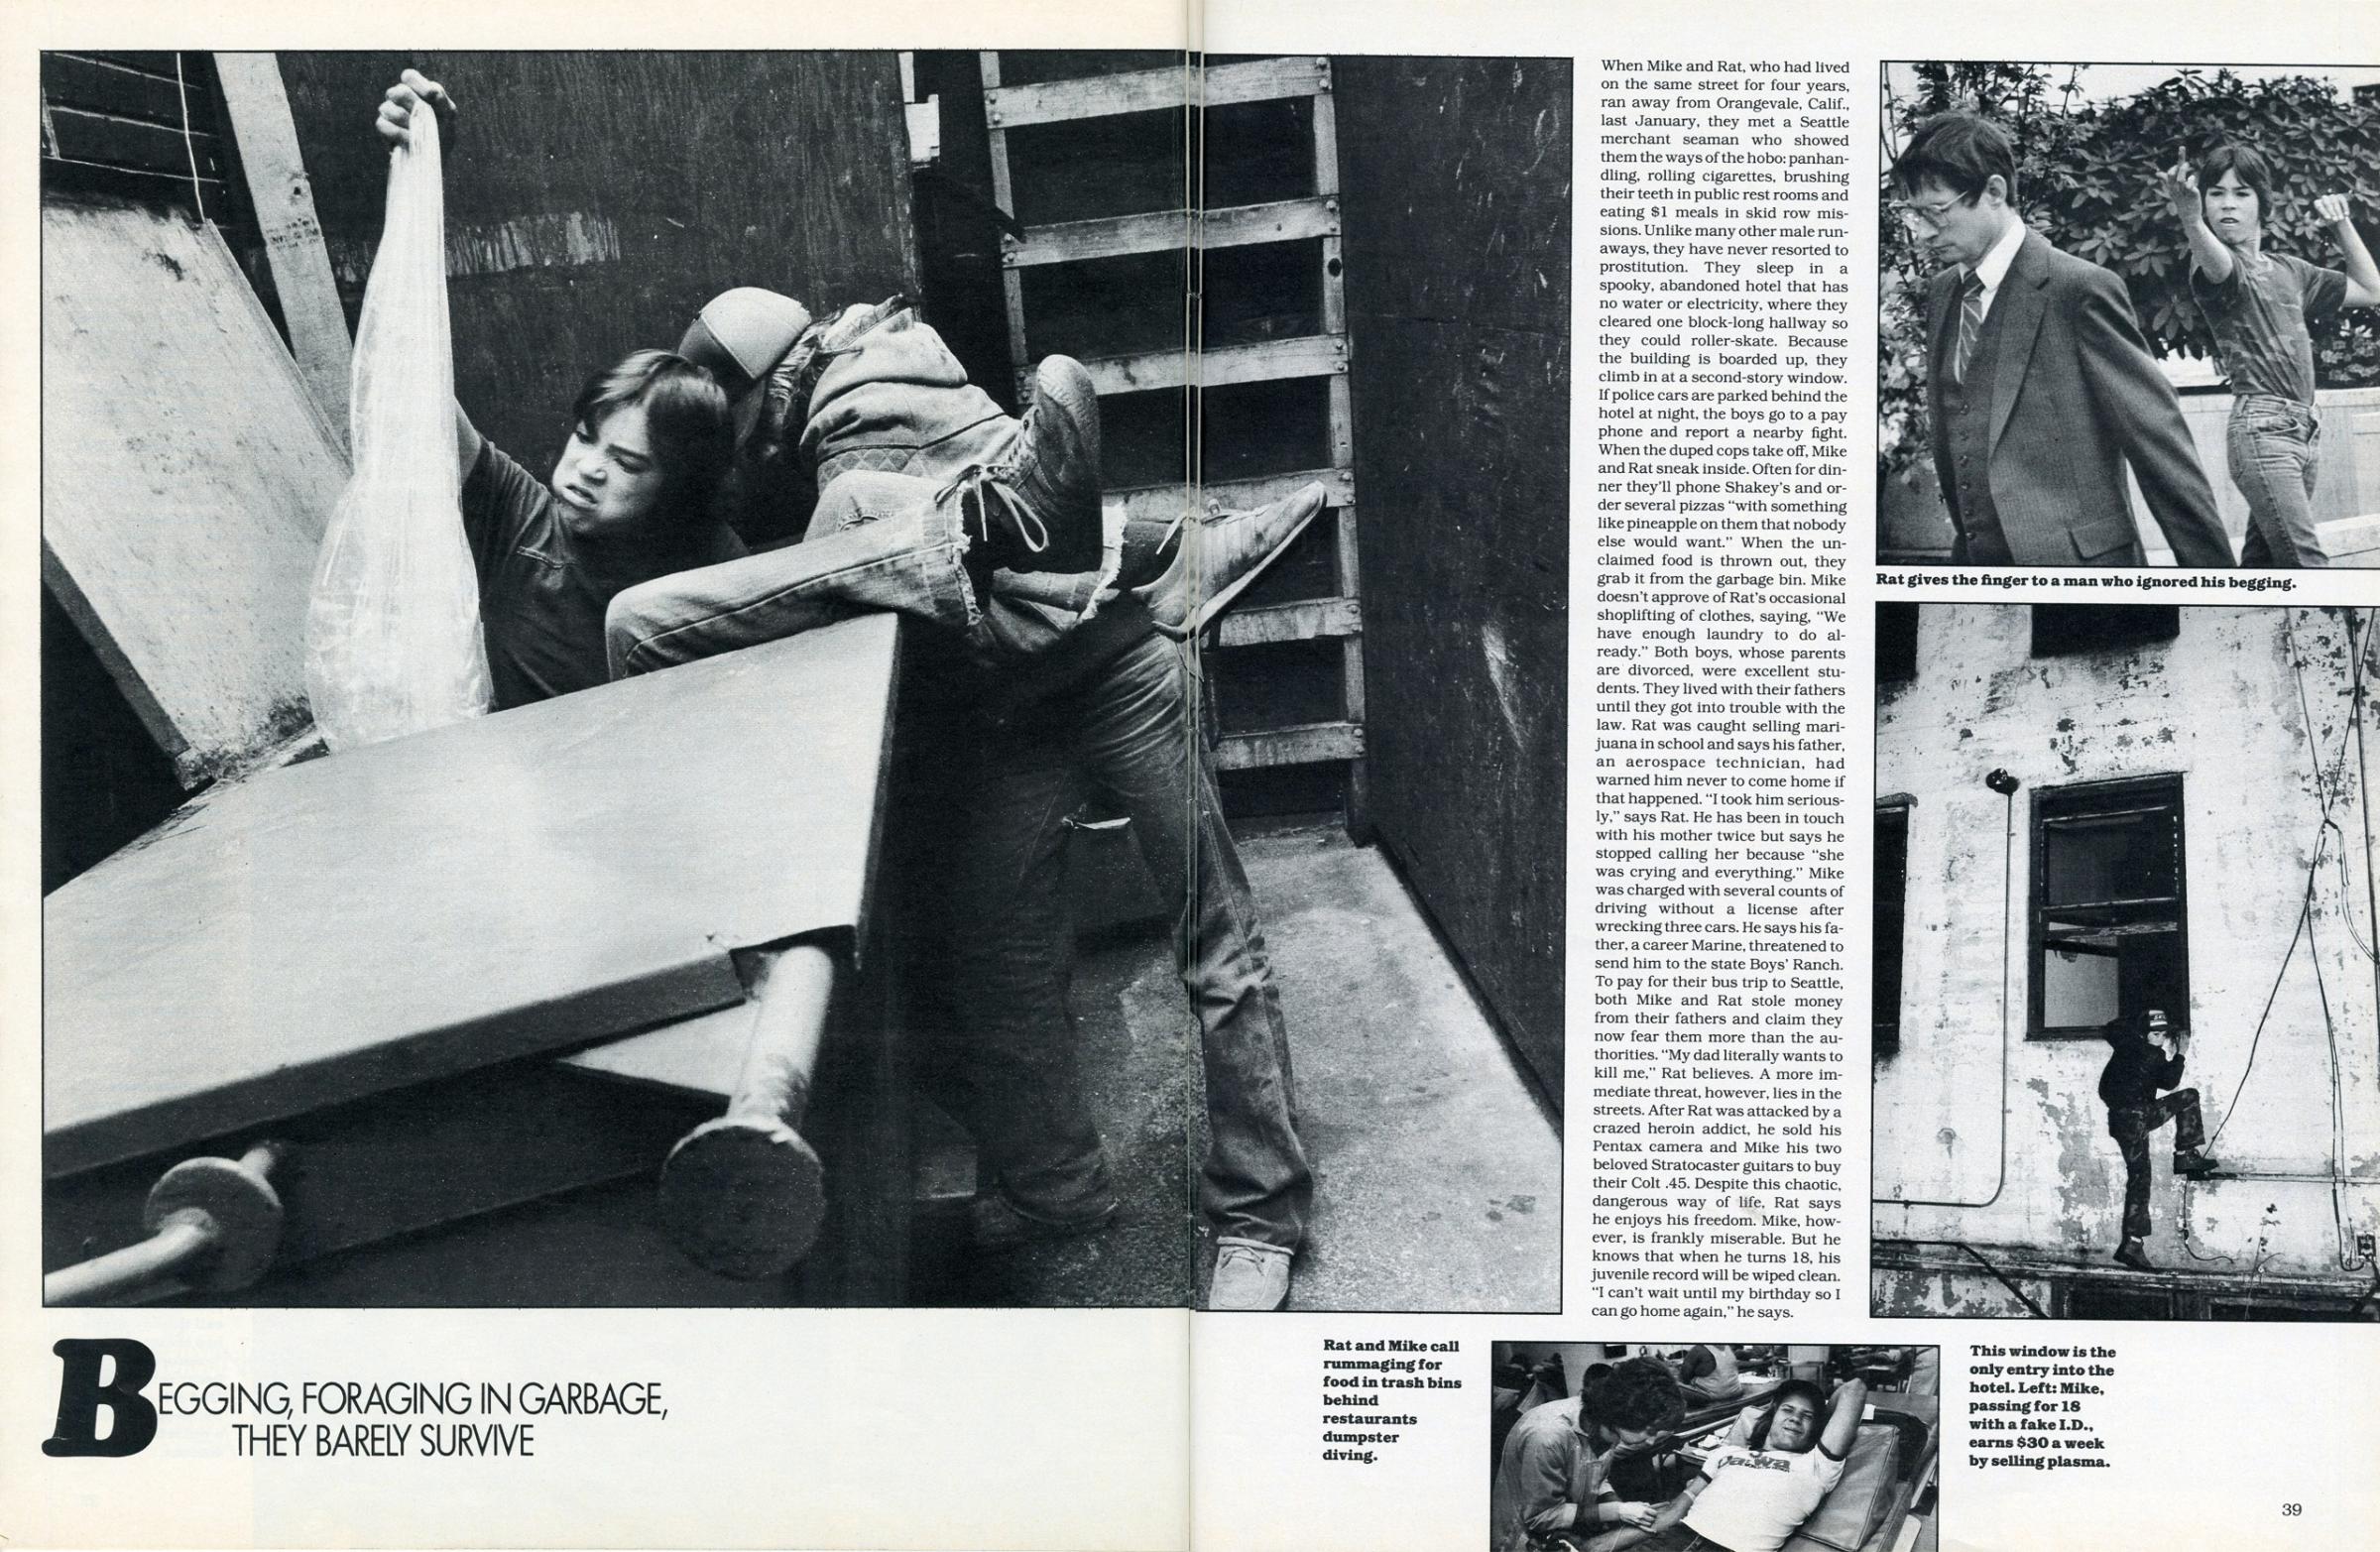 "Streets of the Lost: Runaway Kids eke out a mean life in Seattle"—LIFE magazine, July 1983.